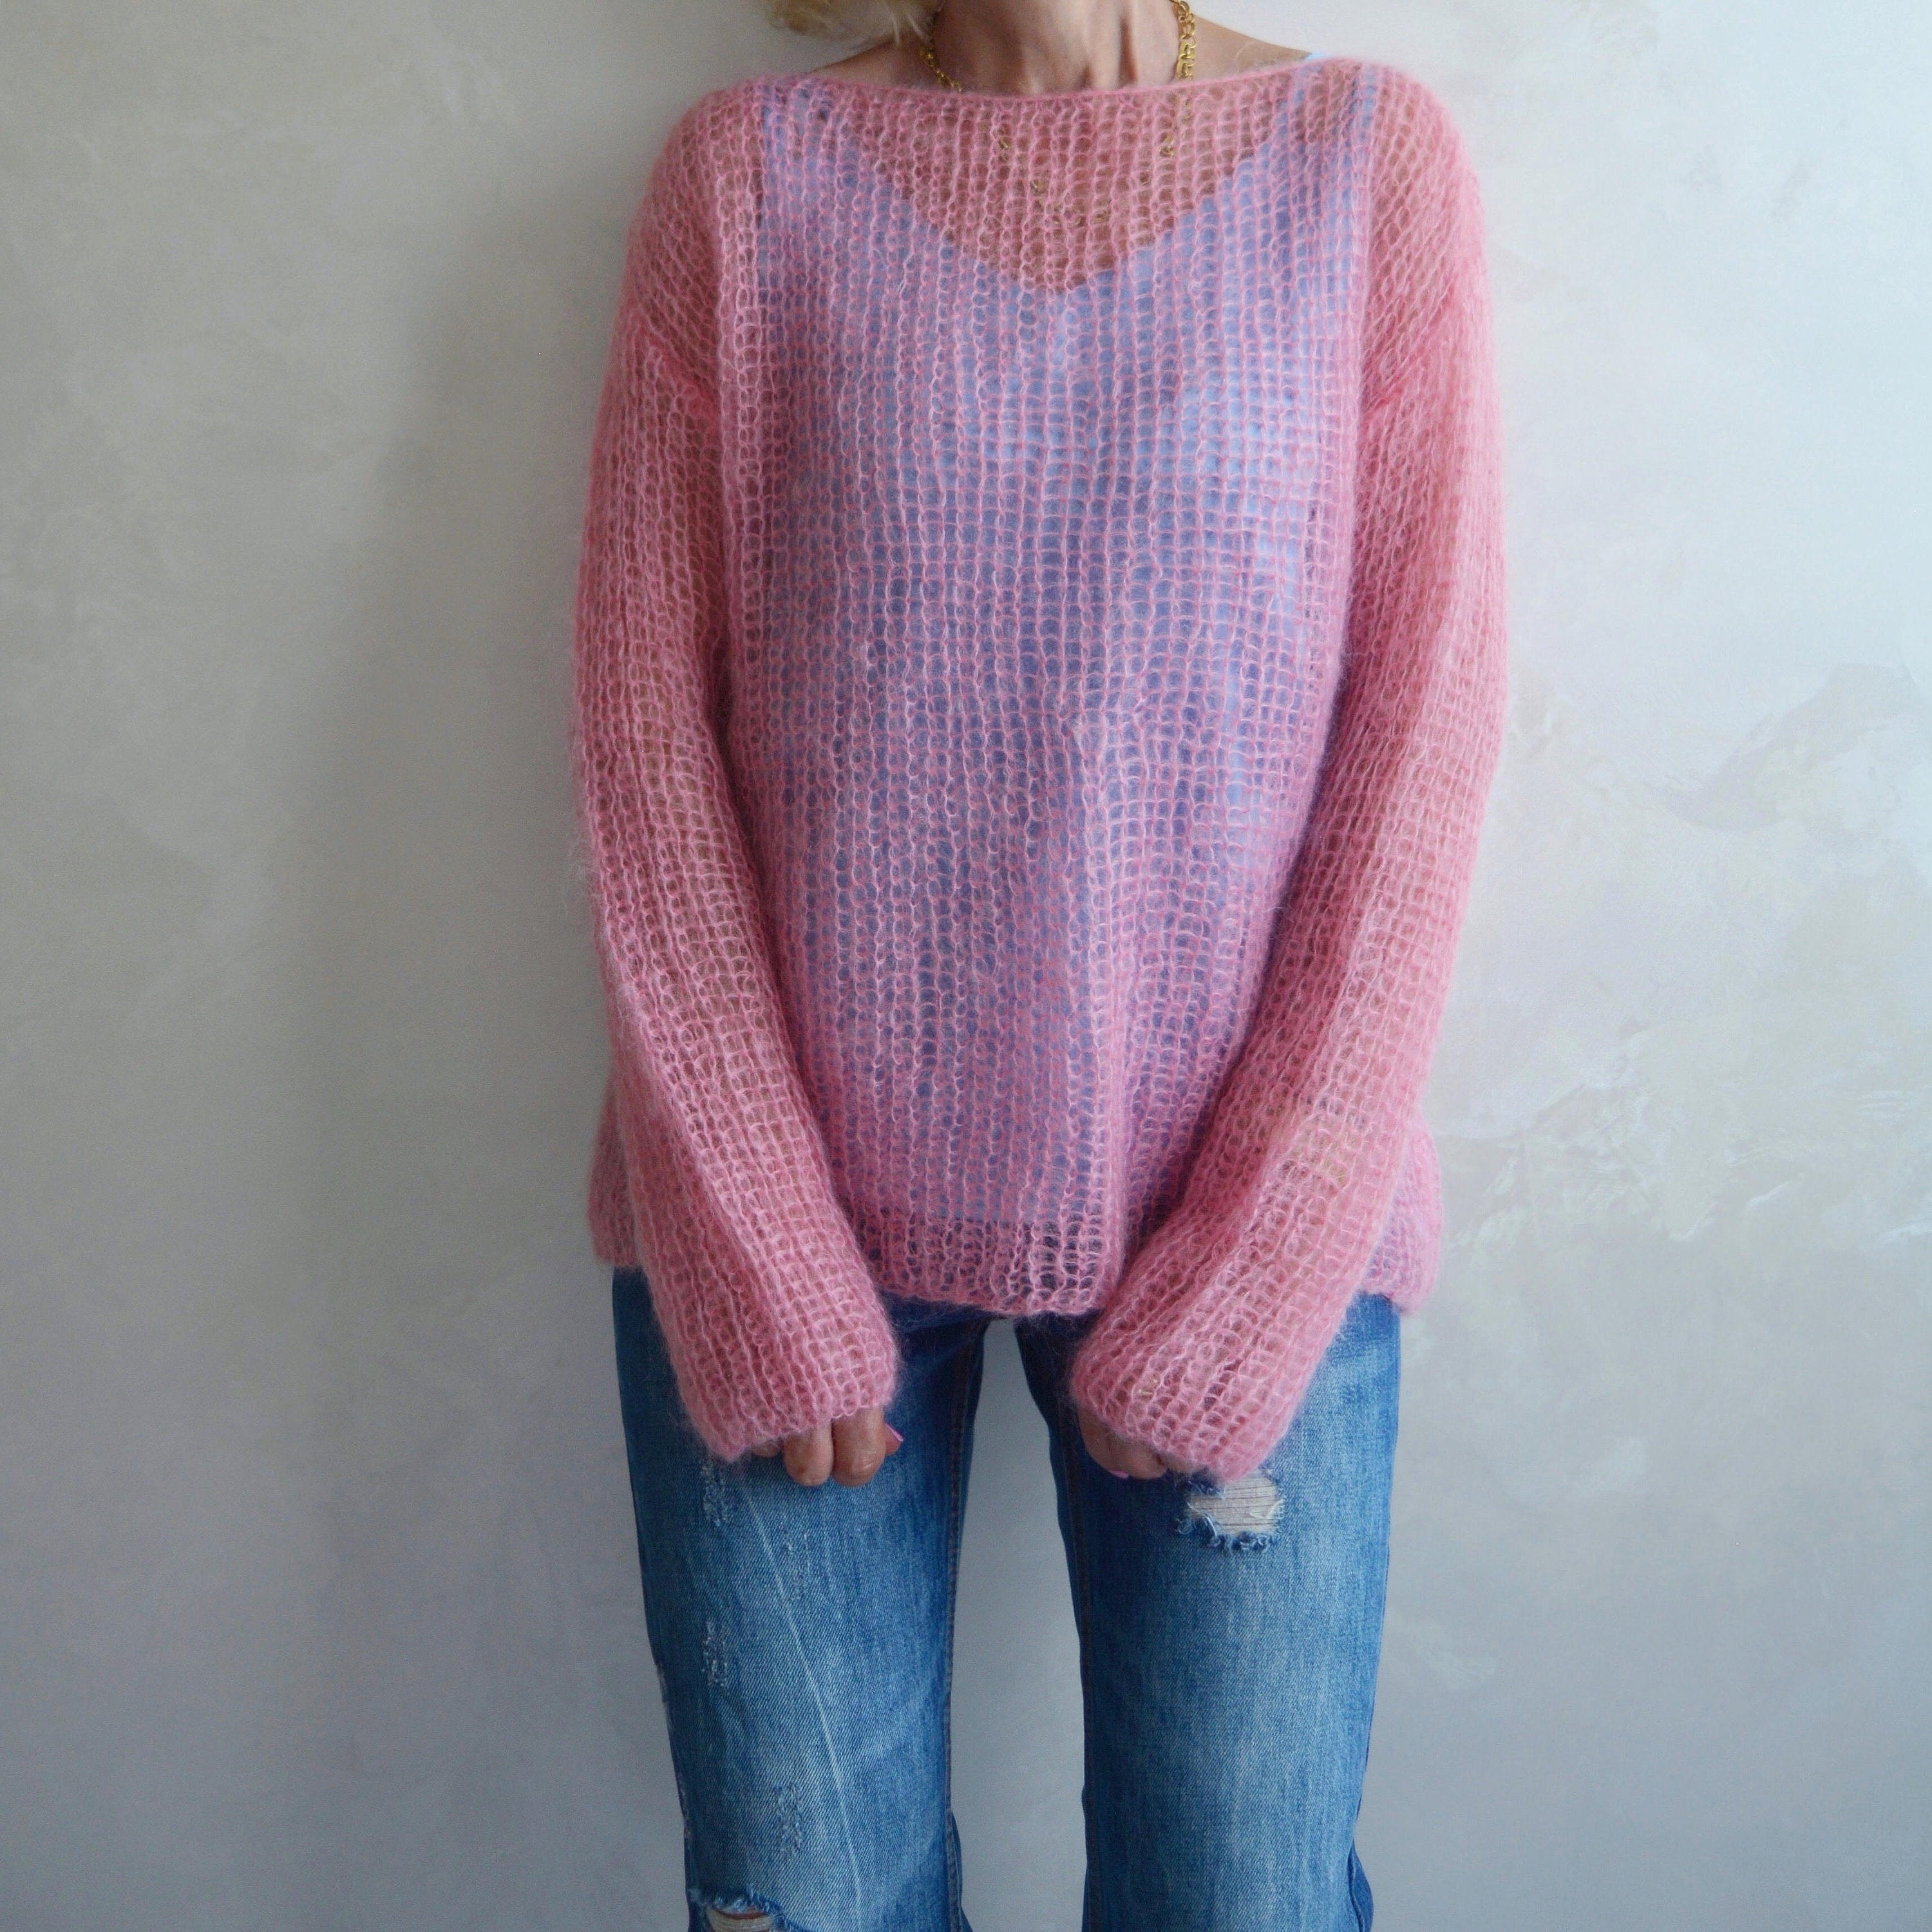 Pink Sweater, Mohair Sweater, Loose Knit Sweater, Turtleneck Sweater,  Spring Sweater, Women Wool Sweater, Pink Knitted Top, Cozy Sweater 